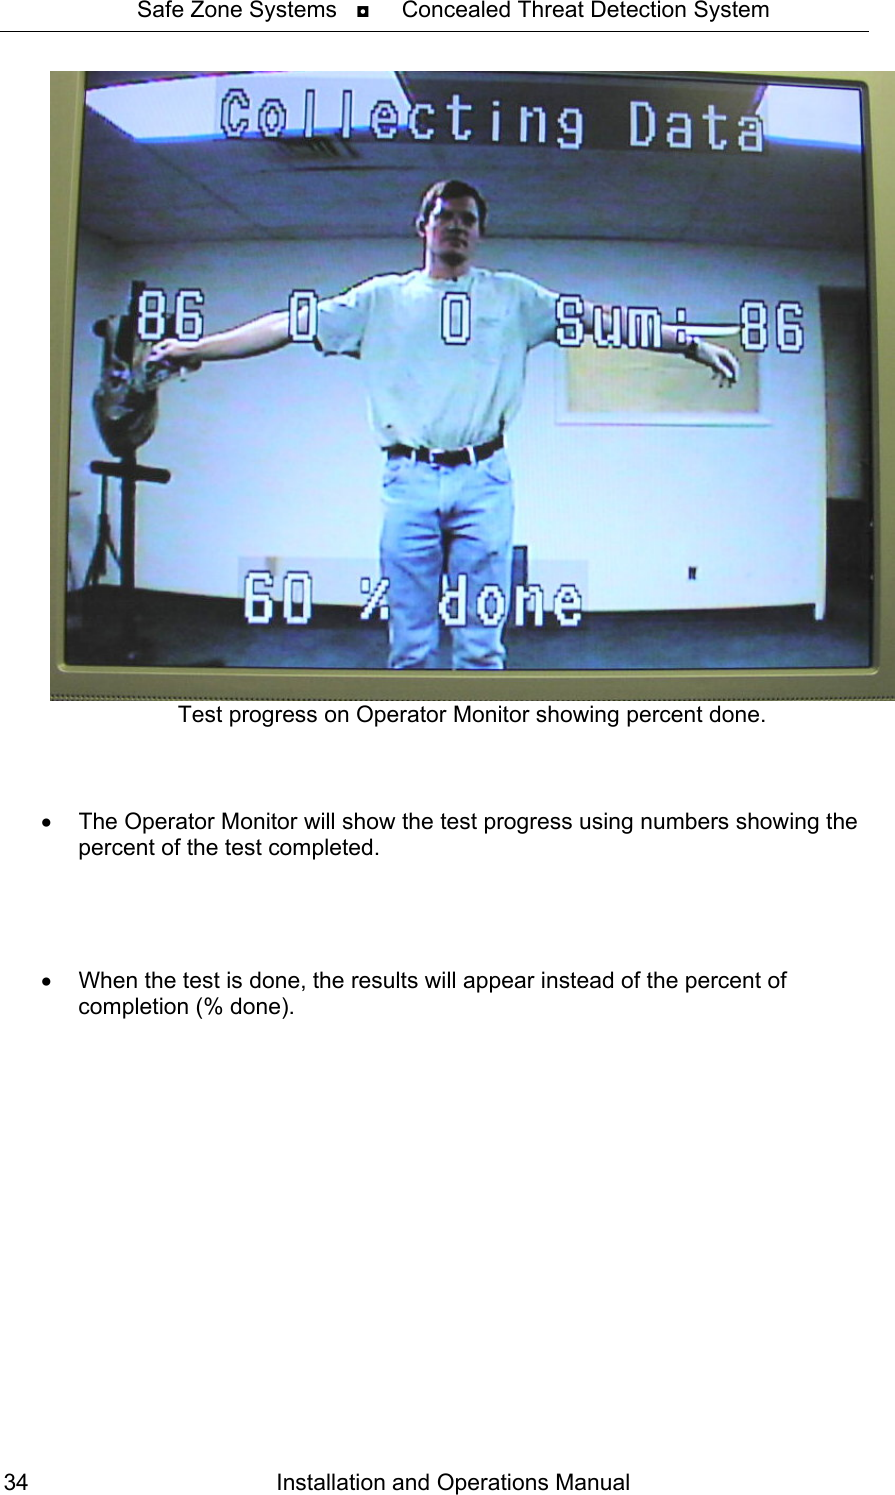 Safe Zone Systems   ◘     Concealed Threat Detection System   Test progress on Operator Monitor showing percent done.    •  The Operator Monitor will show the test progress using numbers showing the percent of the test completed.     •  When the test is done, the results will appear instead of the percent of completion (% done).  Installation and Operations Manual 34 